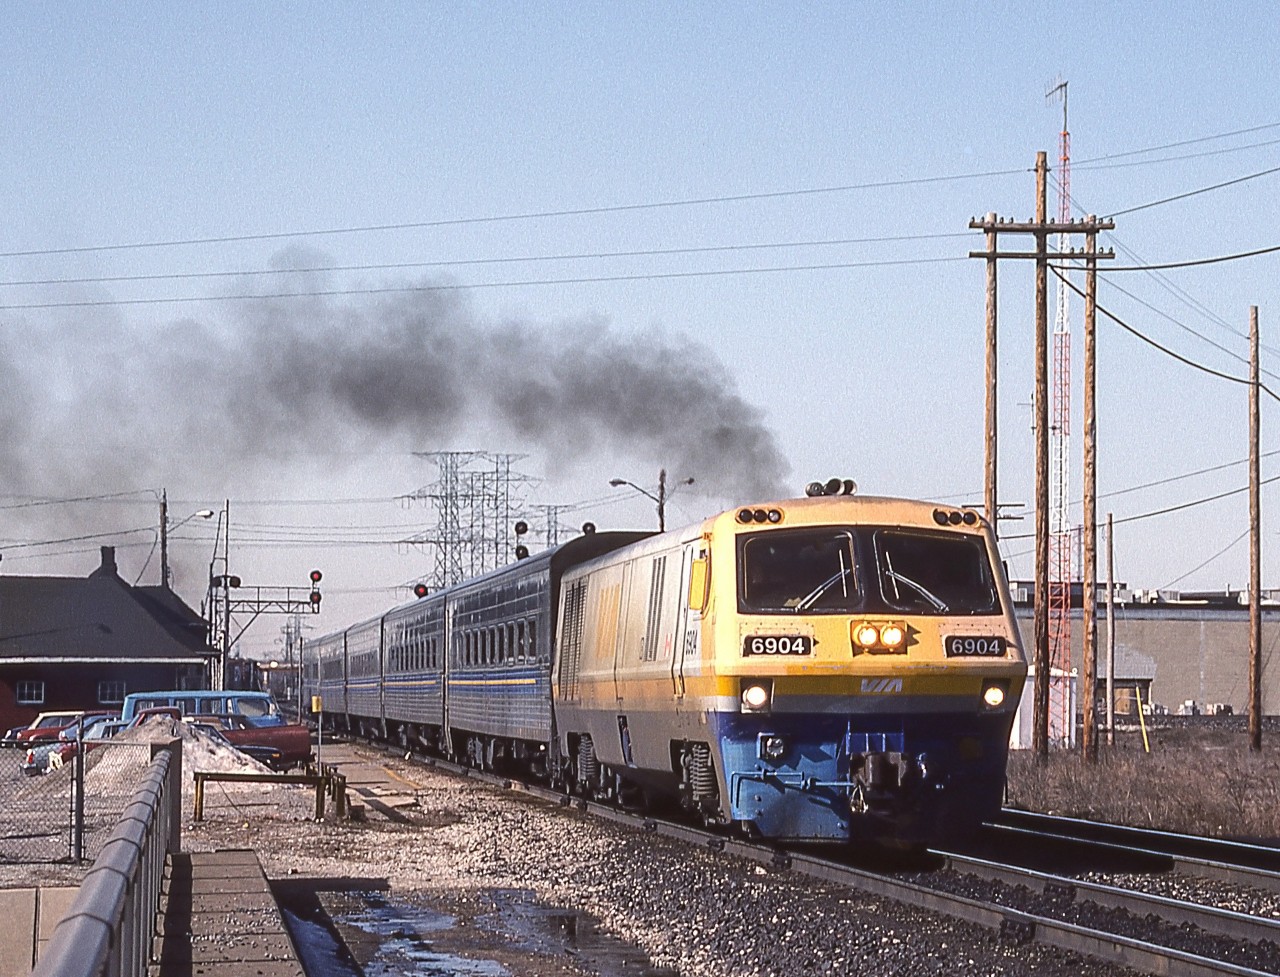 VIA 6904 is in Burlington, Ontario on March 26, 1984. That is the VIA station on the left.